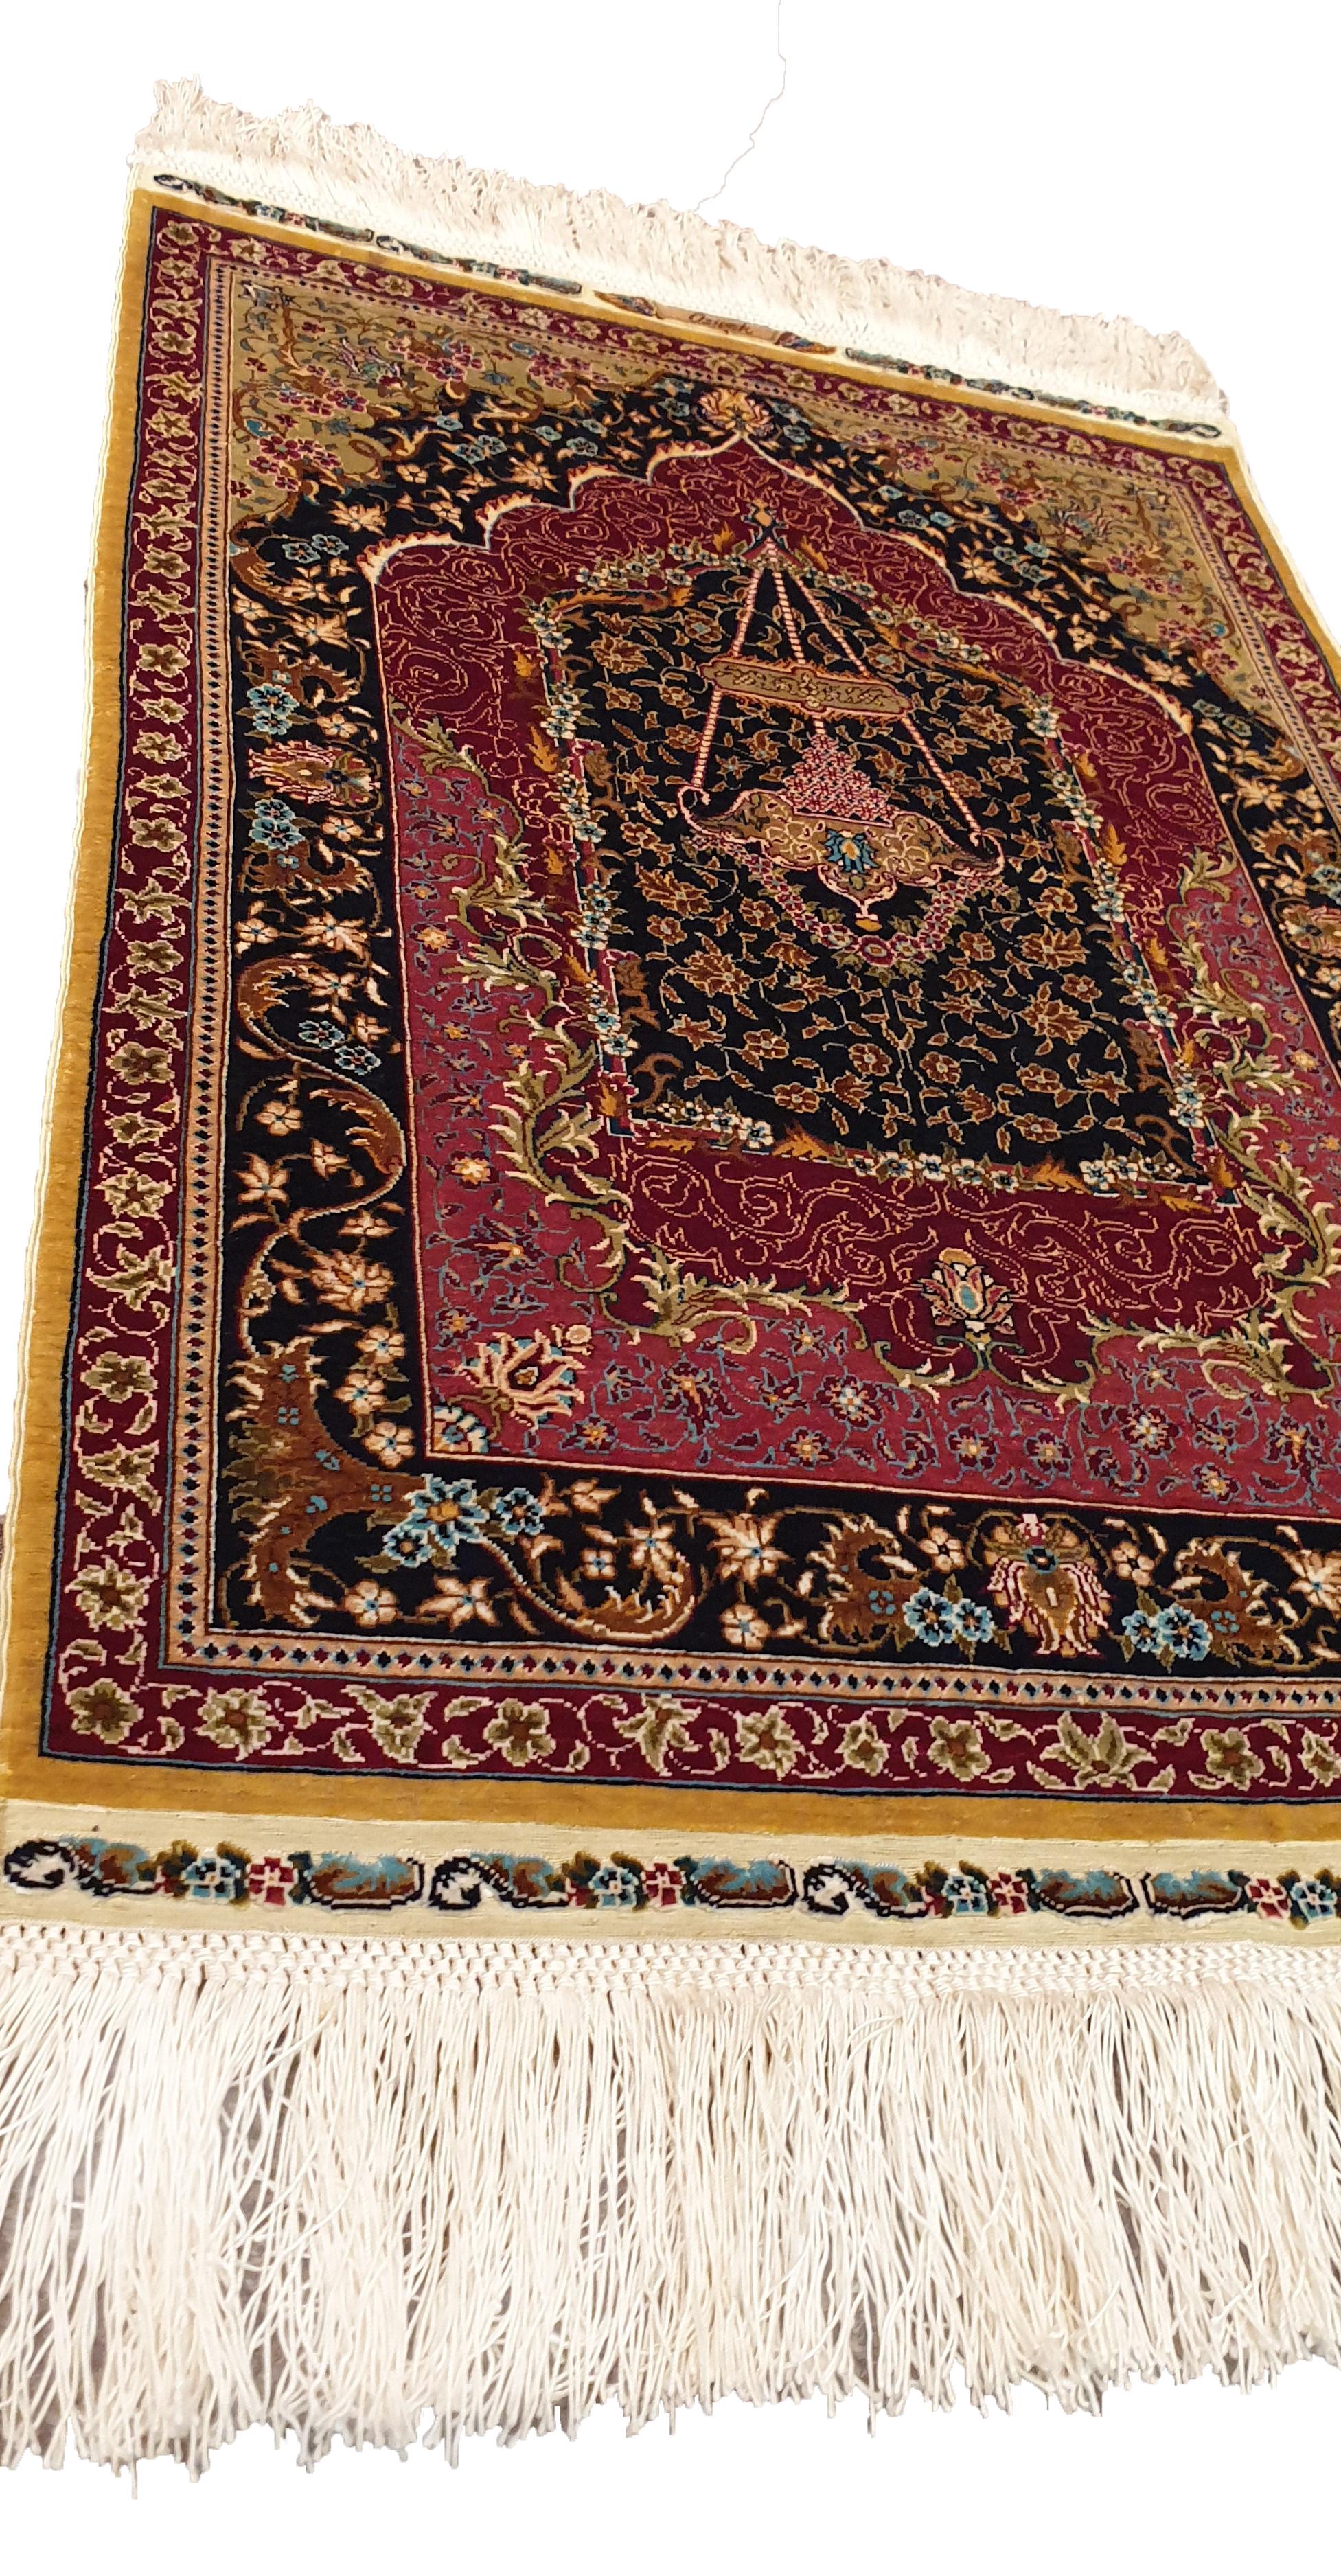 A stone's throw from the Eiffel Tower We are a family business specializing in the purchase, sale and
expertise of old, modern and contemporary tapestries, rugs, kilims and textiles.
We work for private clients, amateurs, antique dealers, also